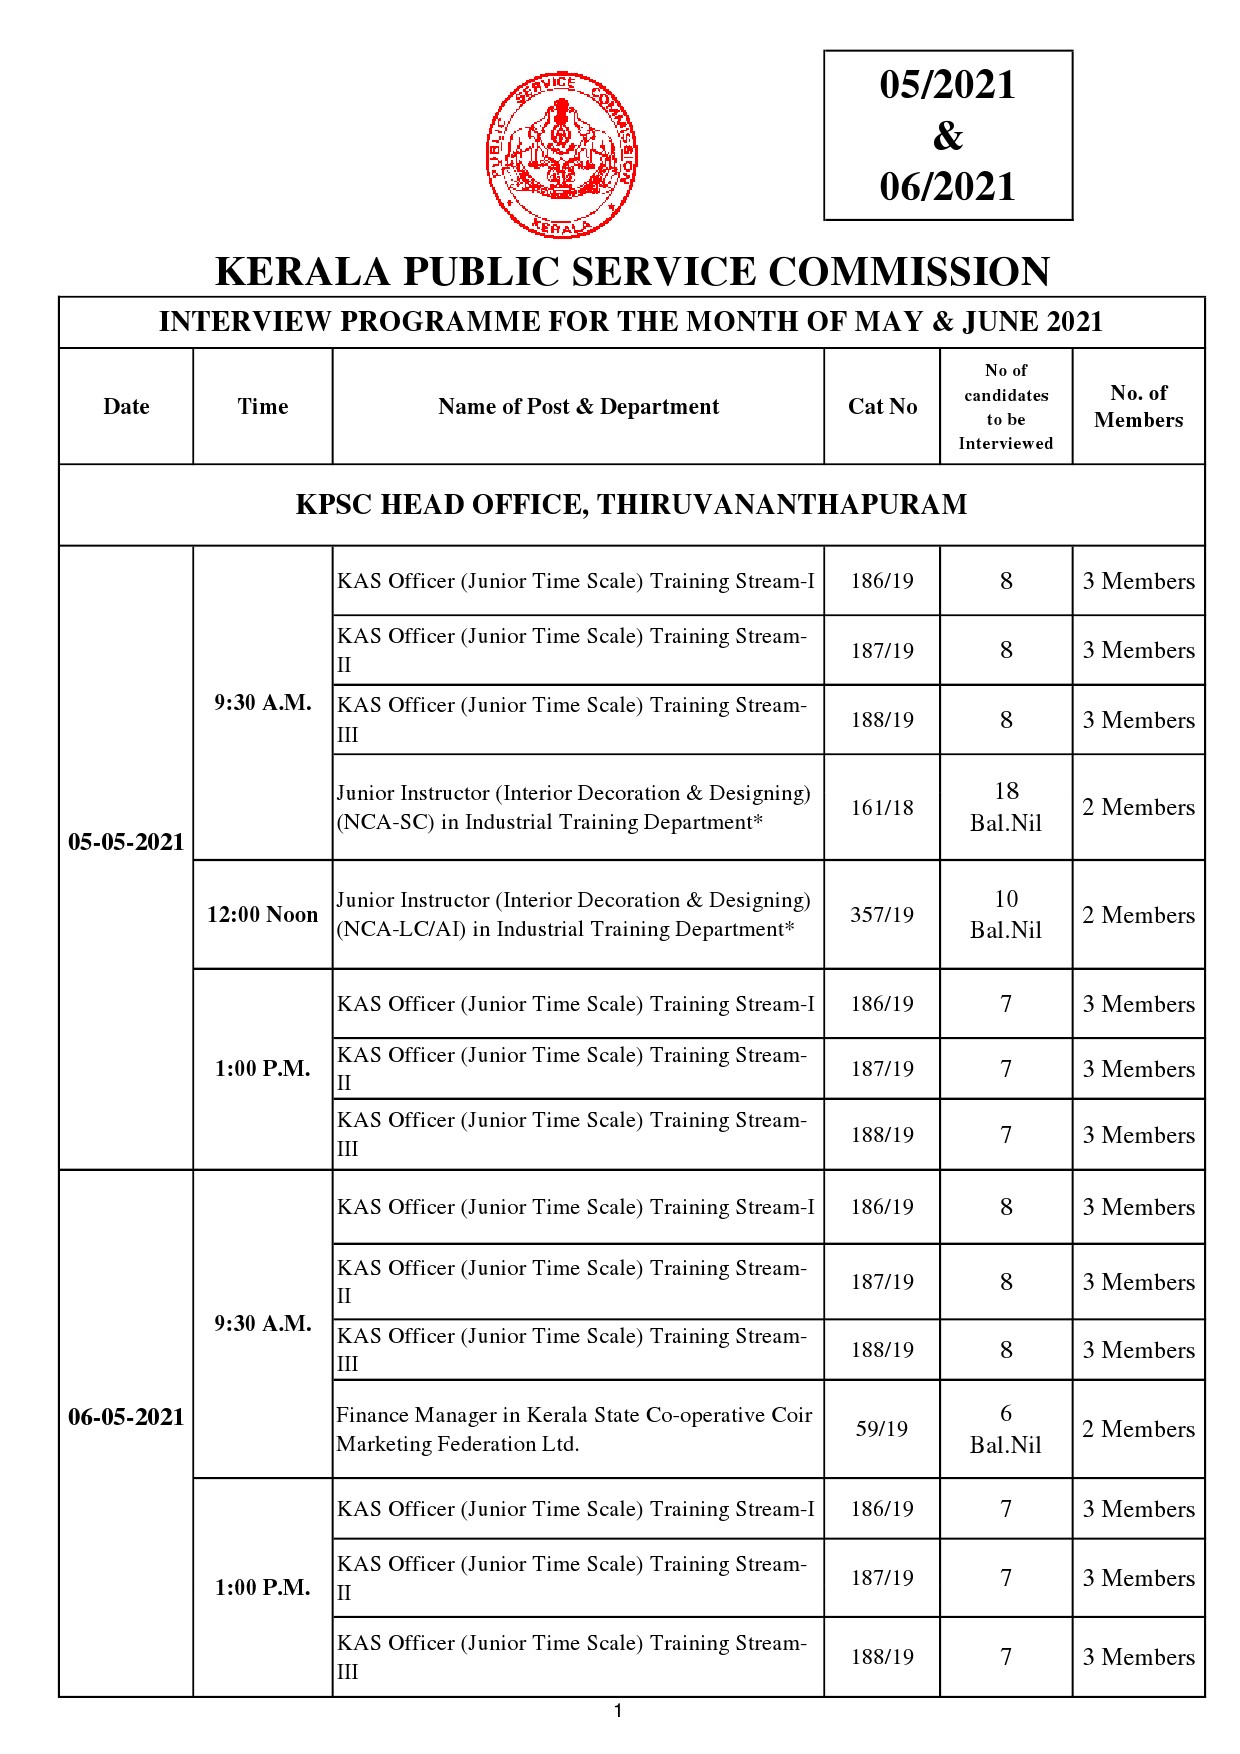 INTERVIEW PROGRAMME FOR THE MONTH OF MAY JUNE 2021 - Notification Image 1